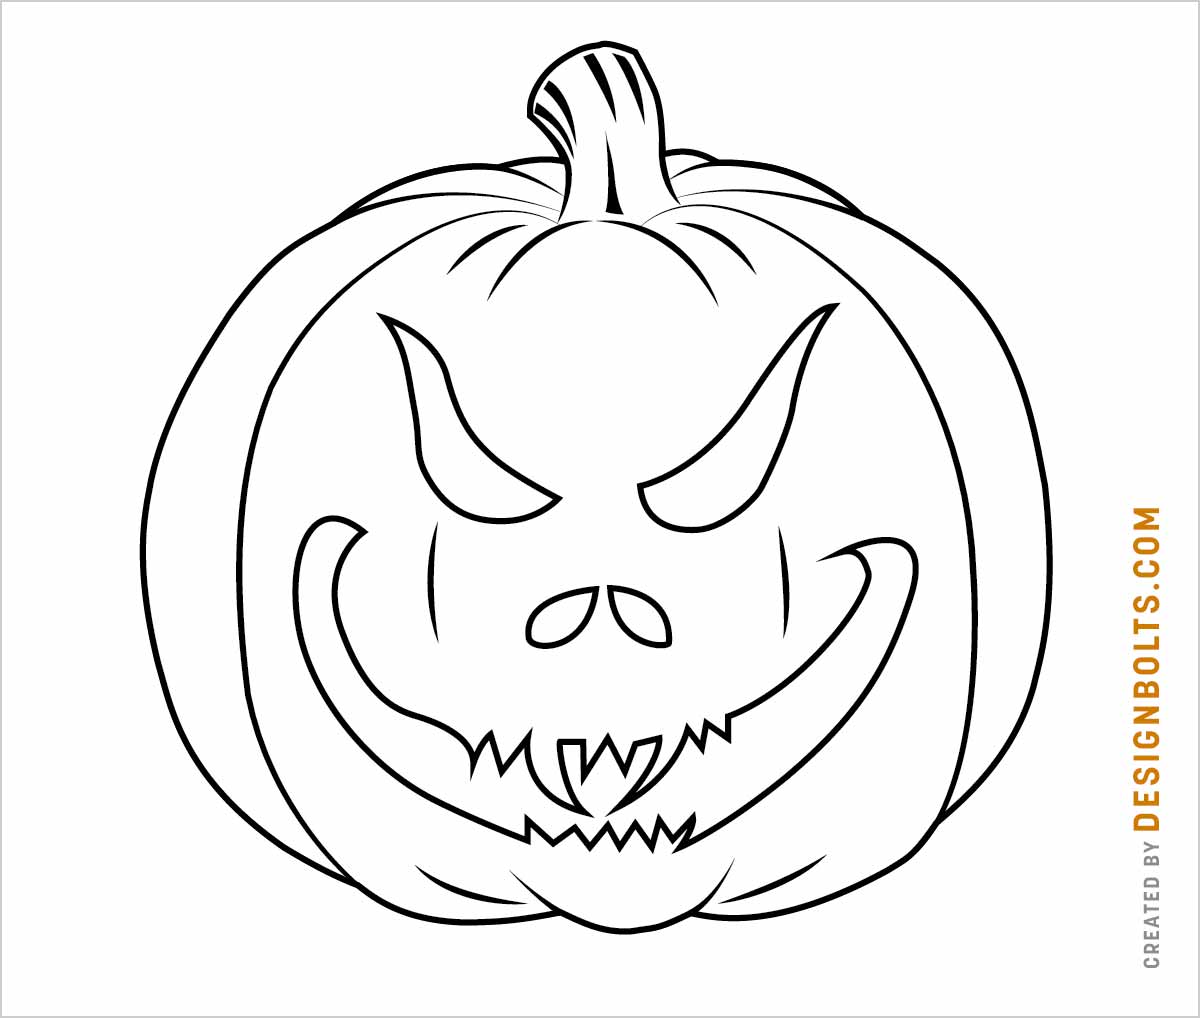 How to draw s scary Halloween pumpkin by ImagiDraw on DeviantArt